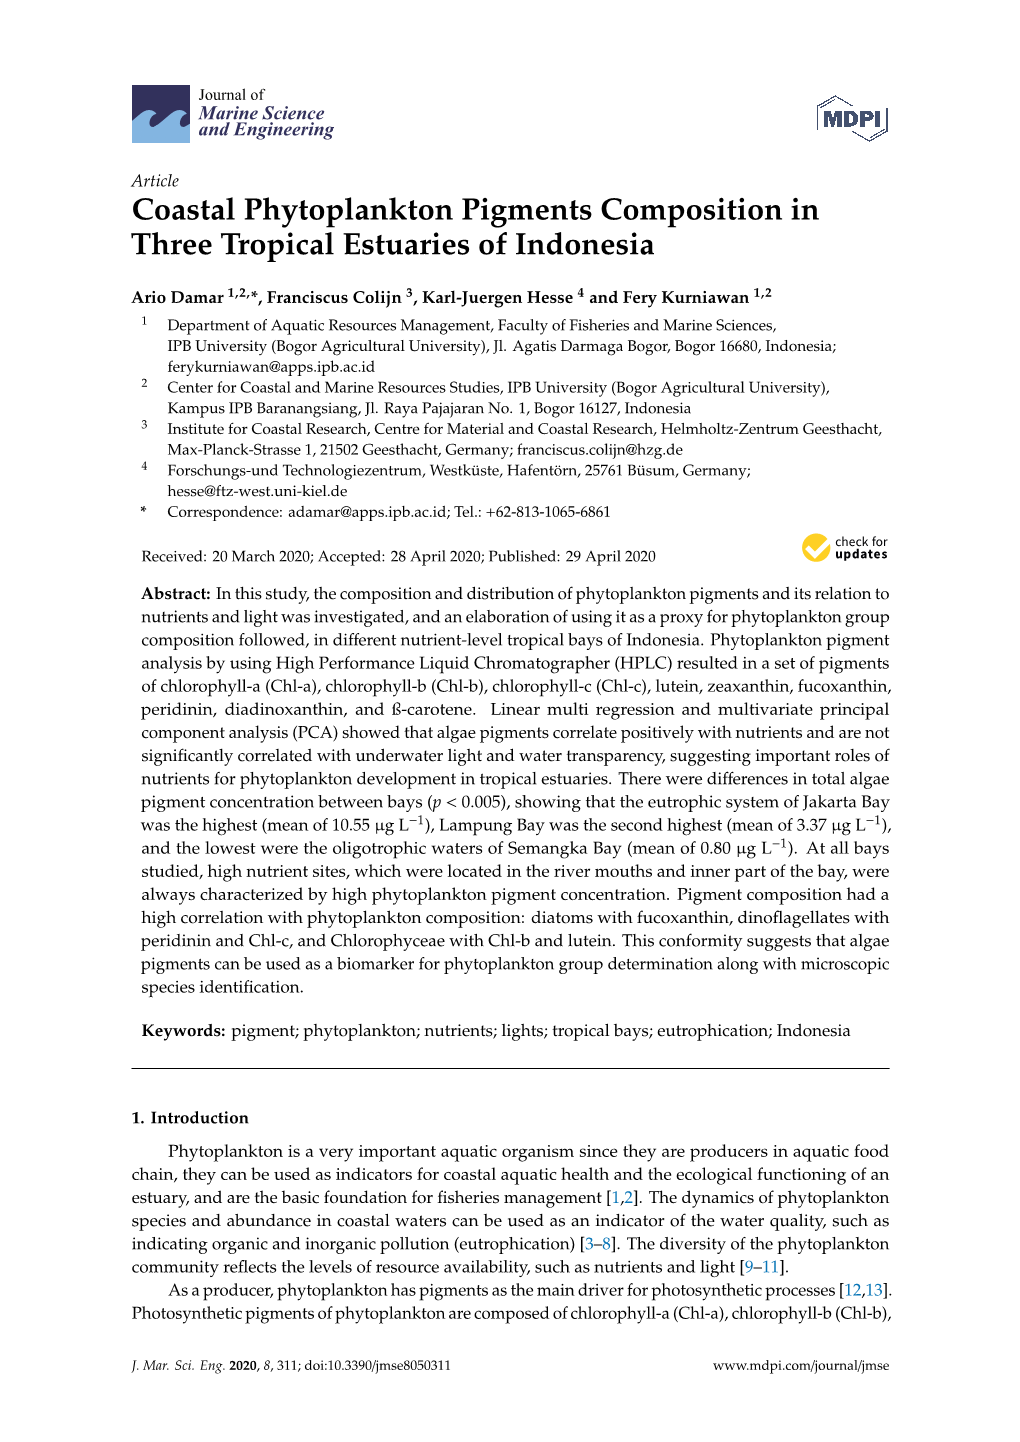 Coastal Phytoplankton Pigments Composition in Three Tropical Estuaries of Indonesia